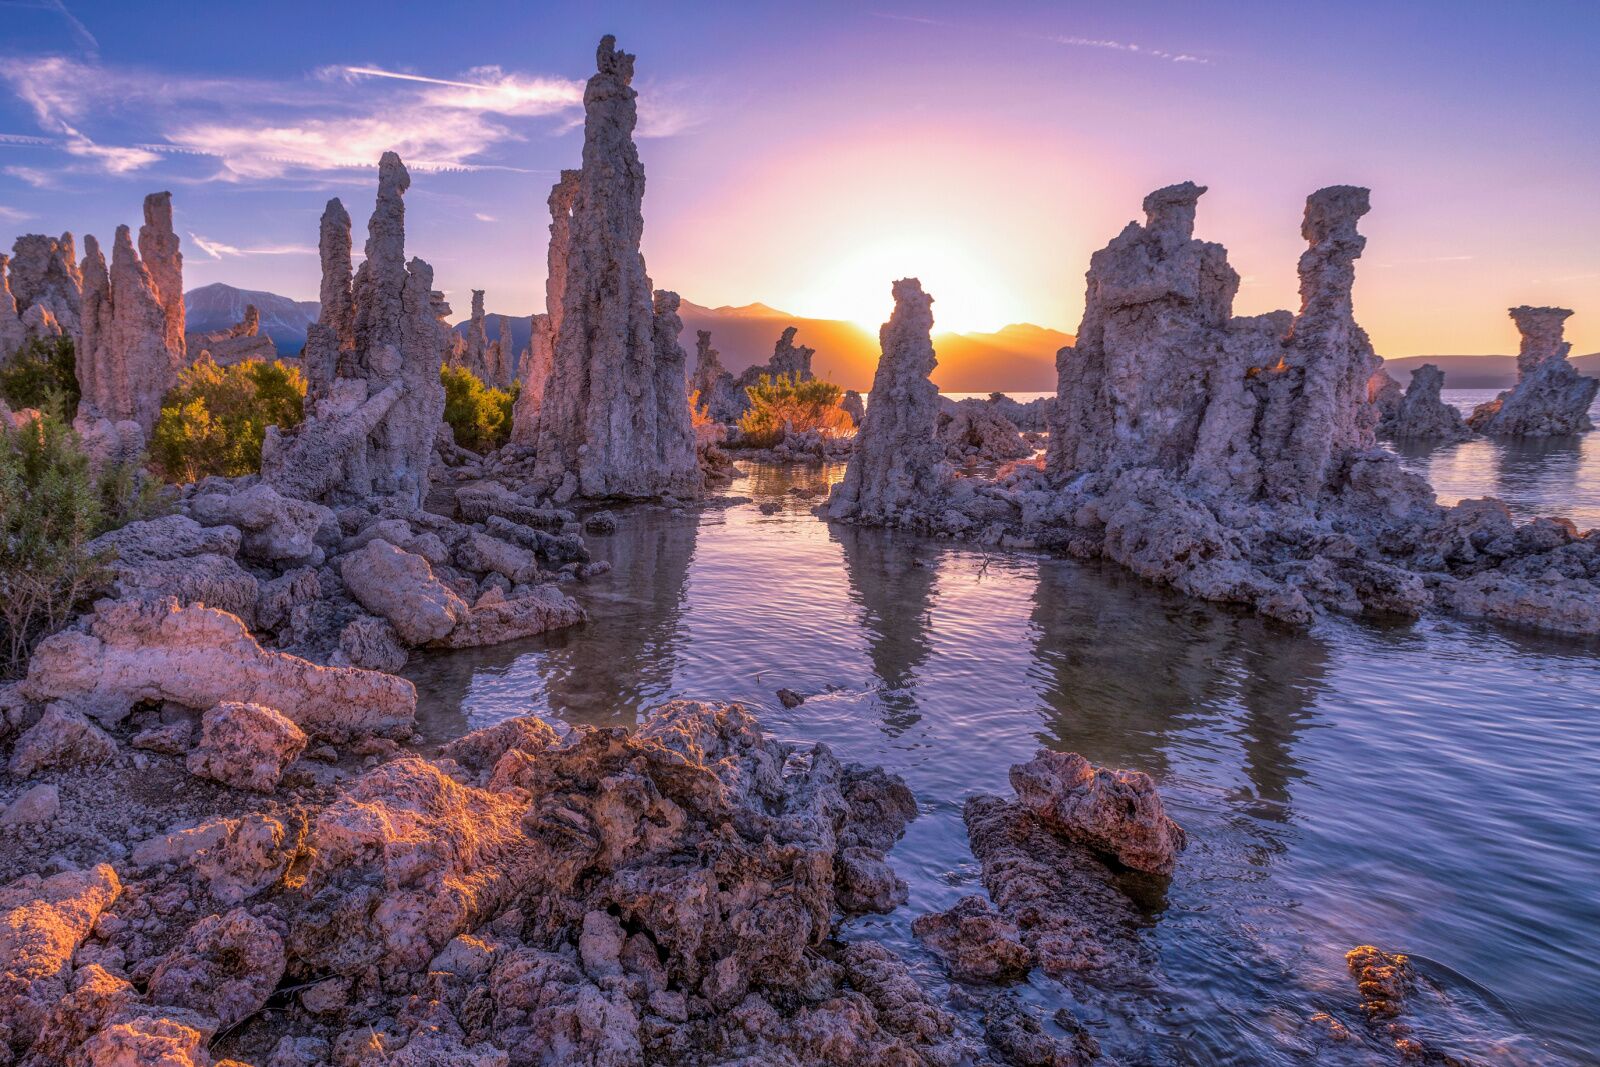 tufa formations at mono, one of the best parks near yosemite 